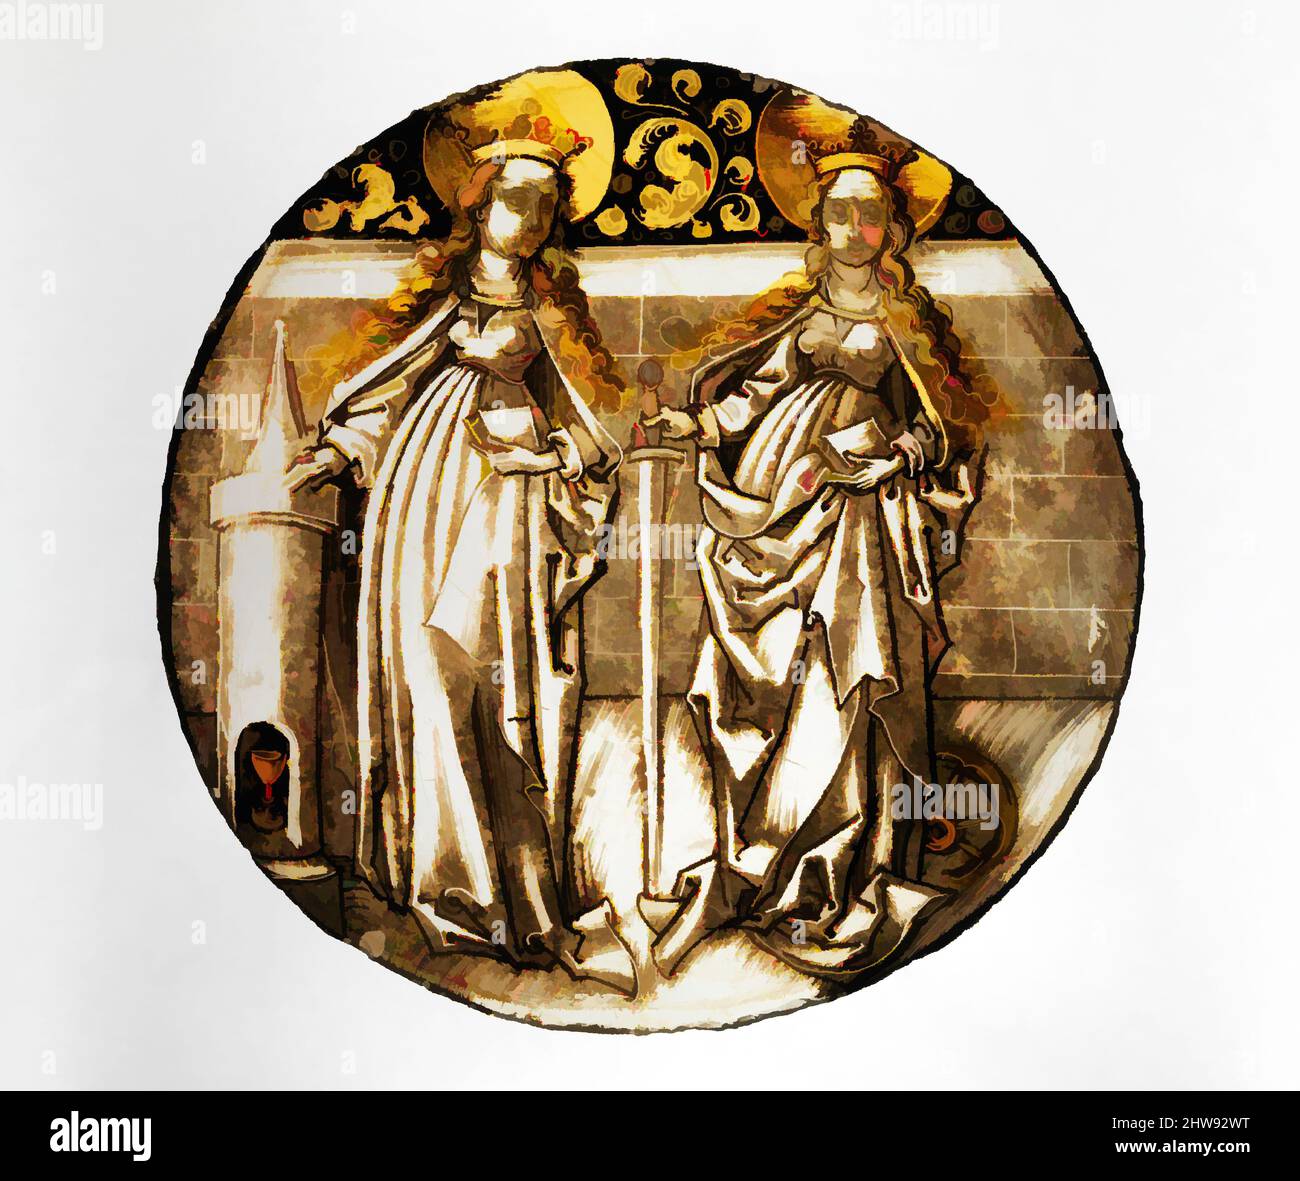 Art inspired by Roundel with Saints Barbara and Catherine, ca. 1500–1510, Made in Germany, German, Colorless glass, vitreous paint, and silver stain, 6 1/4 × 1/16 in. (15.9 × 0.2 cm), Glass-Painted, The artist who painted this roundel, probably from Swabia in southwestern Germany, had, Classic works modernized by Artotop with a splash of modernity. Shapes, color and value, eye-catching visual impact on art. Emotions through freedom of artworks in a contemporary way. A timeless message pursuing a wildly creative new direction. Artists turning to the digital medium and creating the Artotop NFT Stock Photo